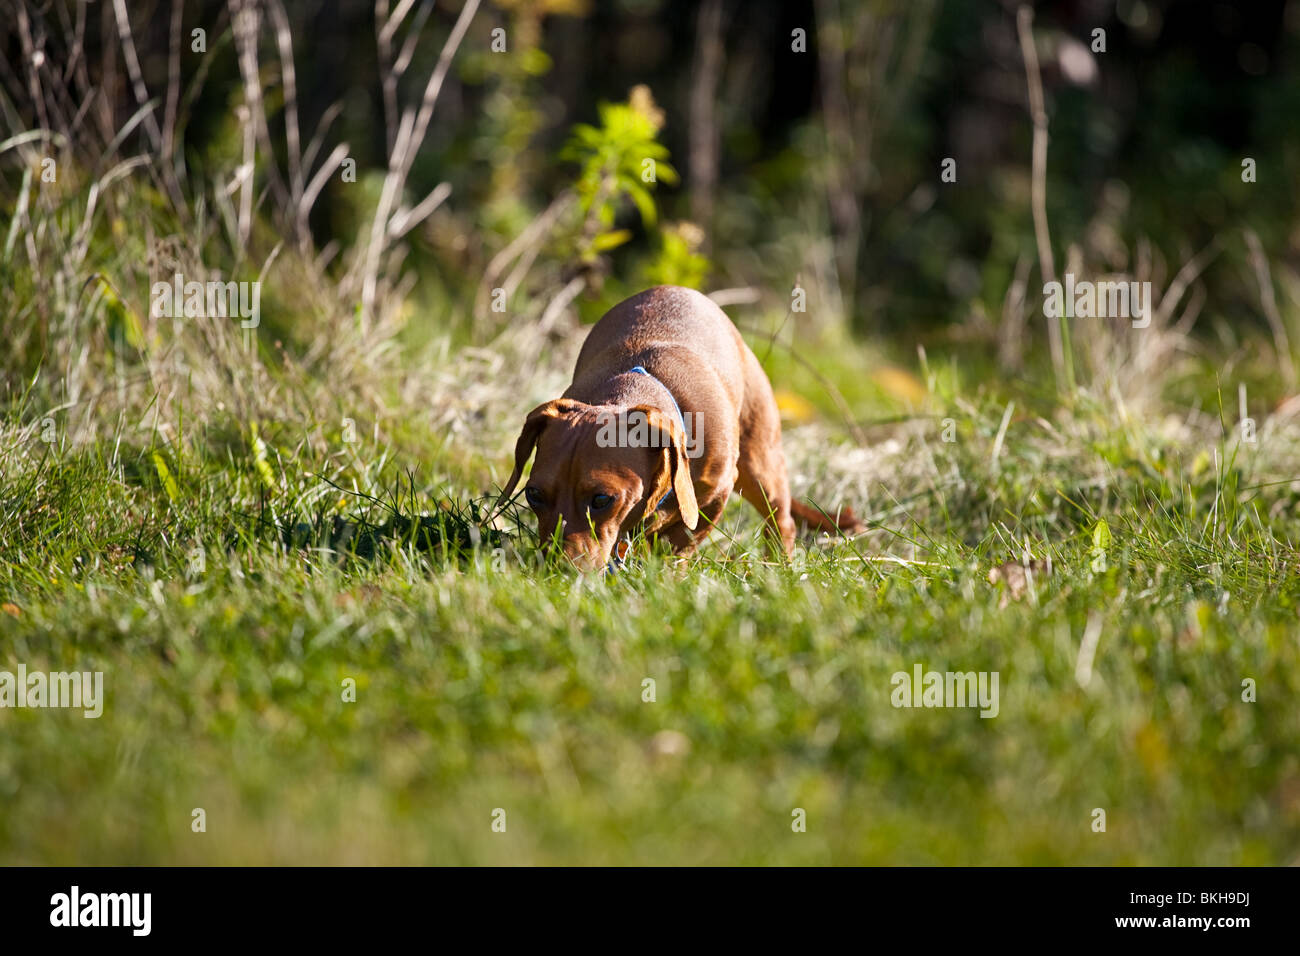 A miniature Dachshund sniffing around in the grass. Stock Photo